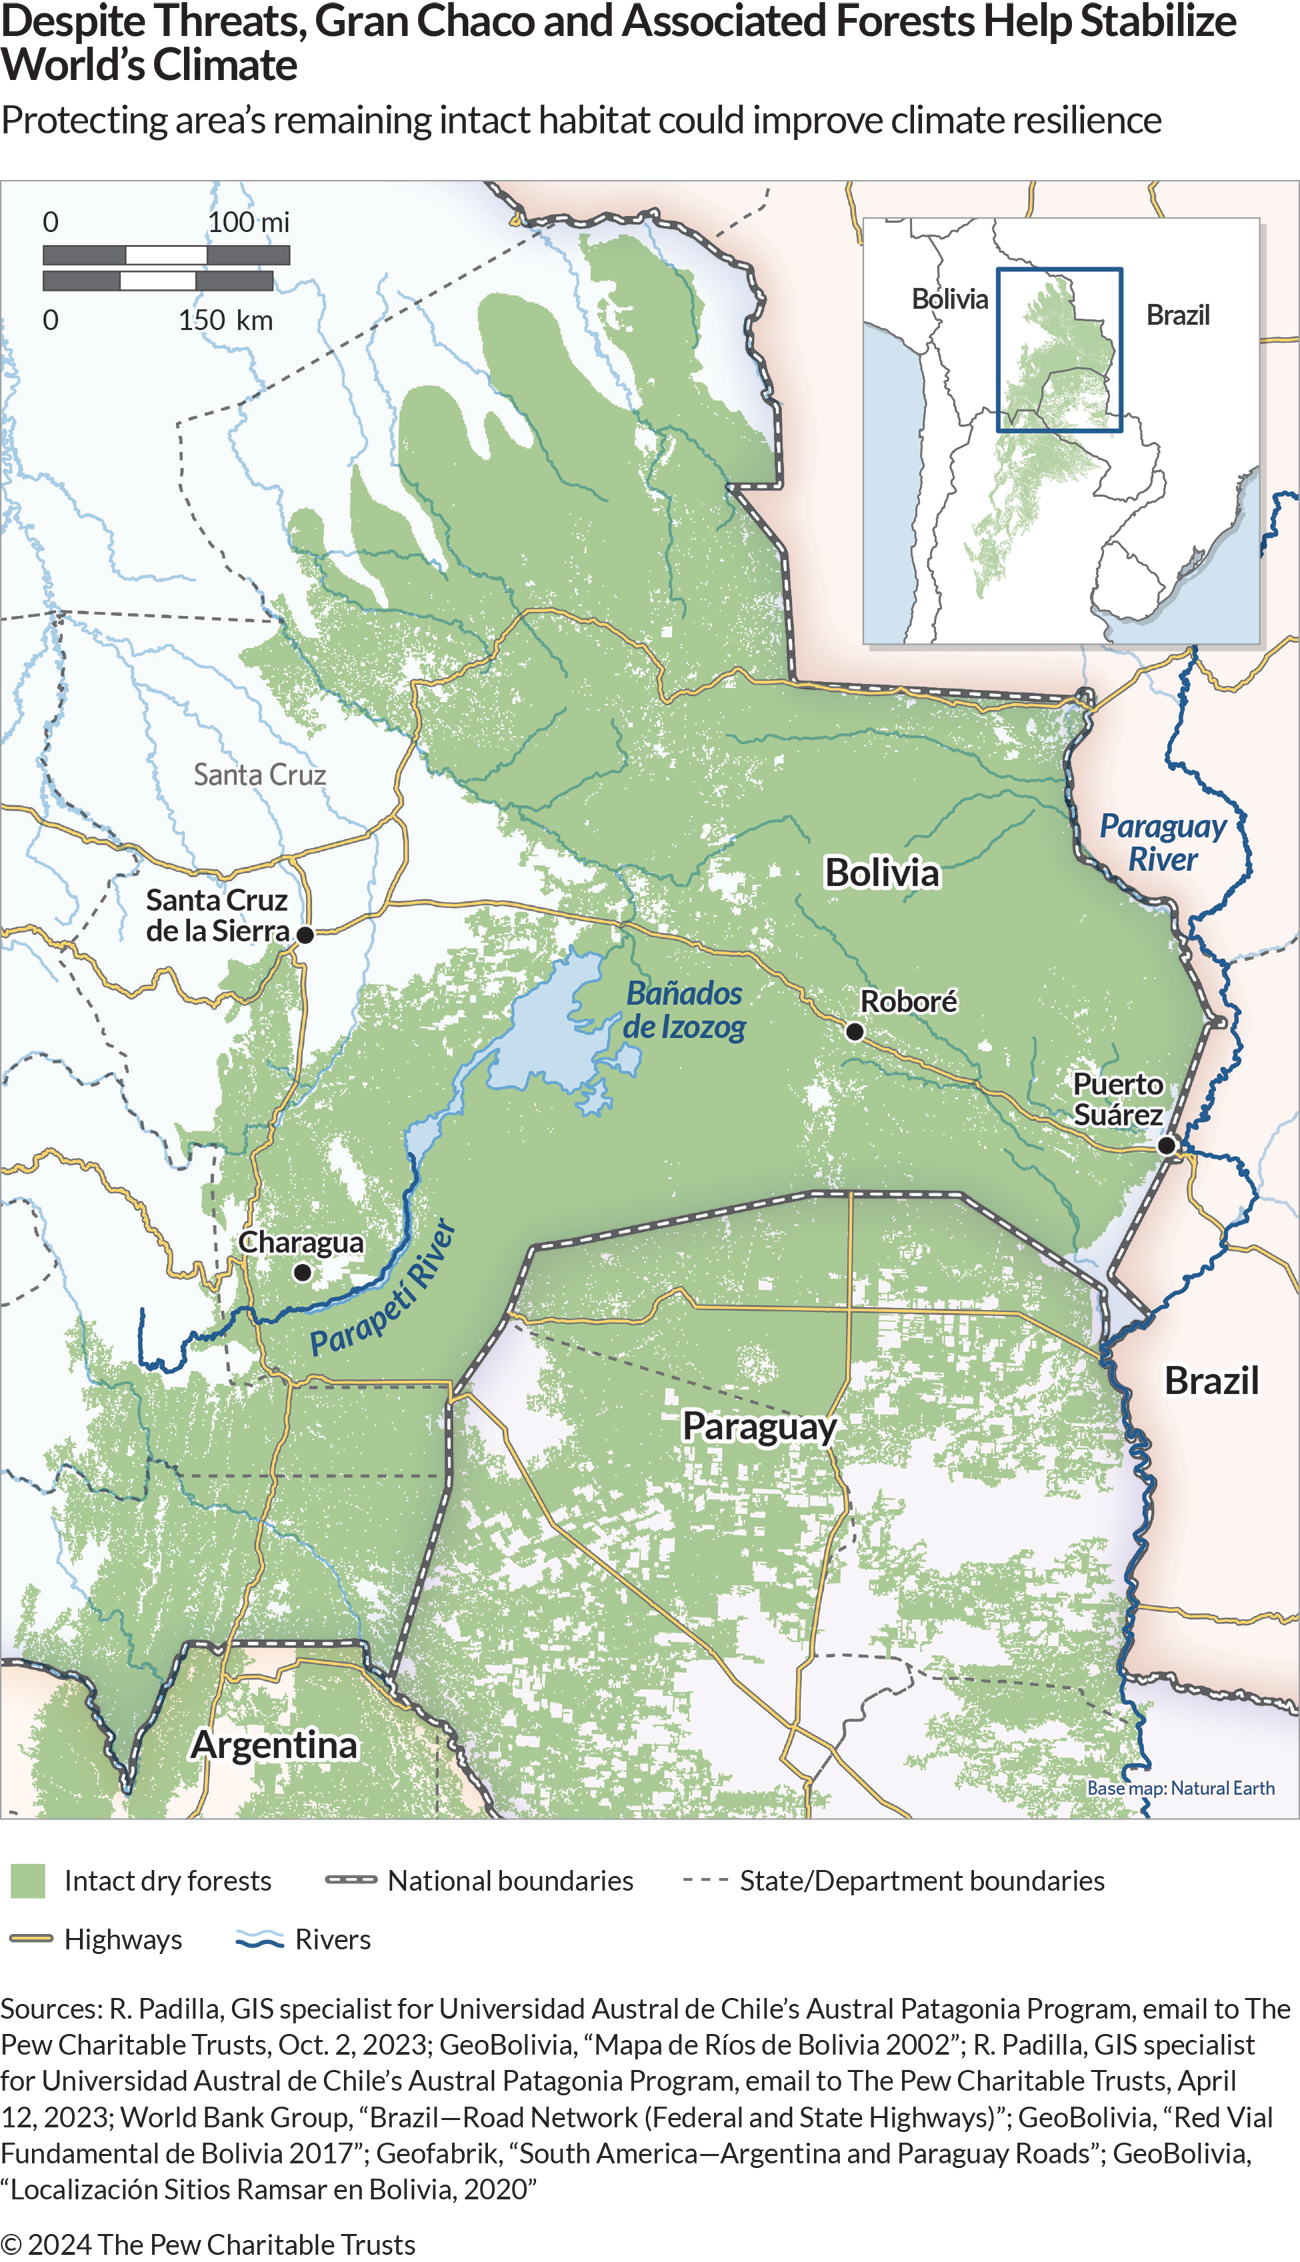 A map shows a portion of South America where Bolivia, Brazil, Paraguay, and Argentina meet, and it includes a large, green-shaded area. The map also indicates the locations of some rivers, highways, cities, and states and departments.